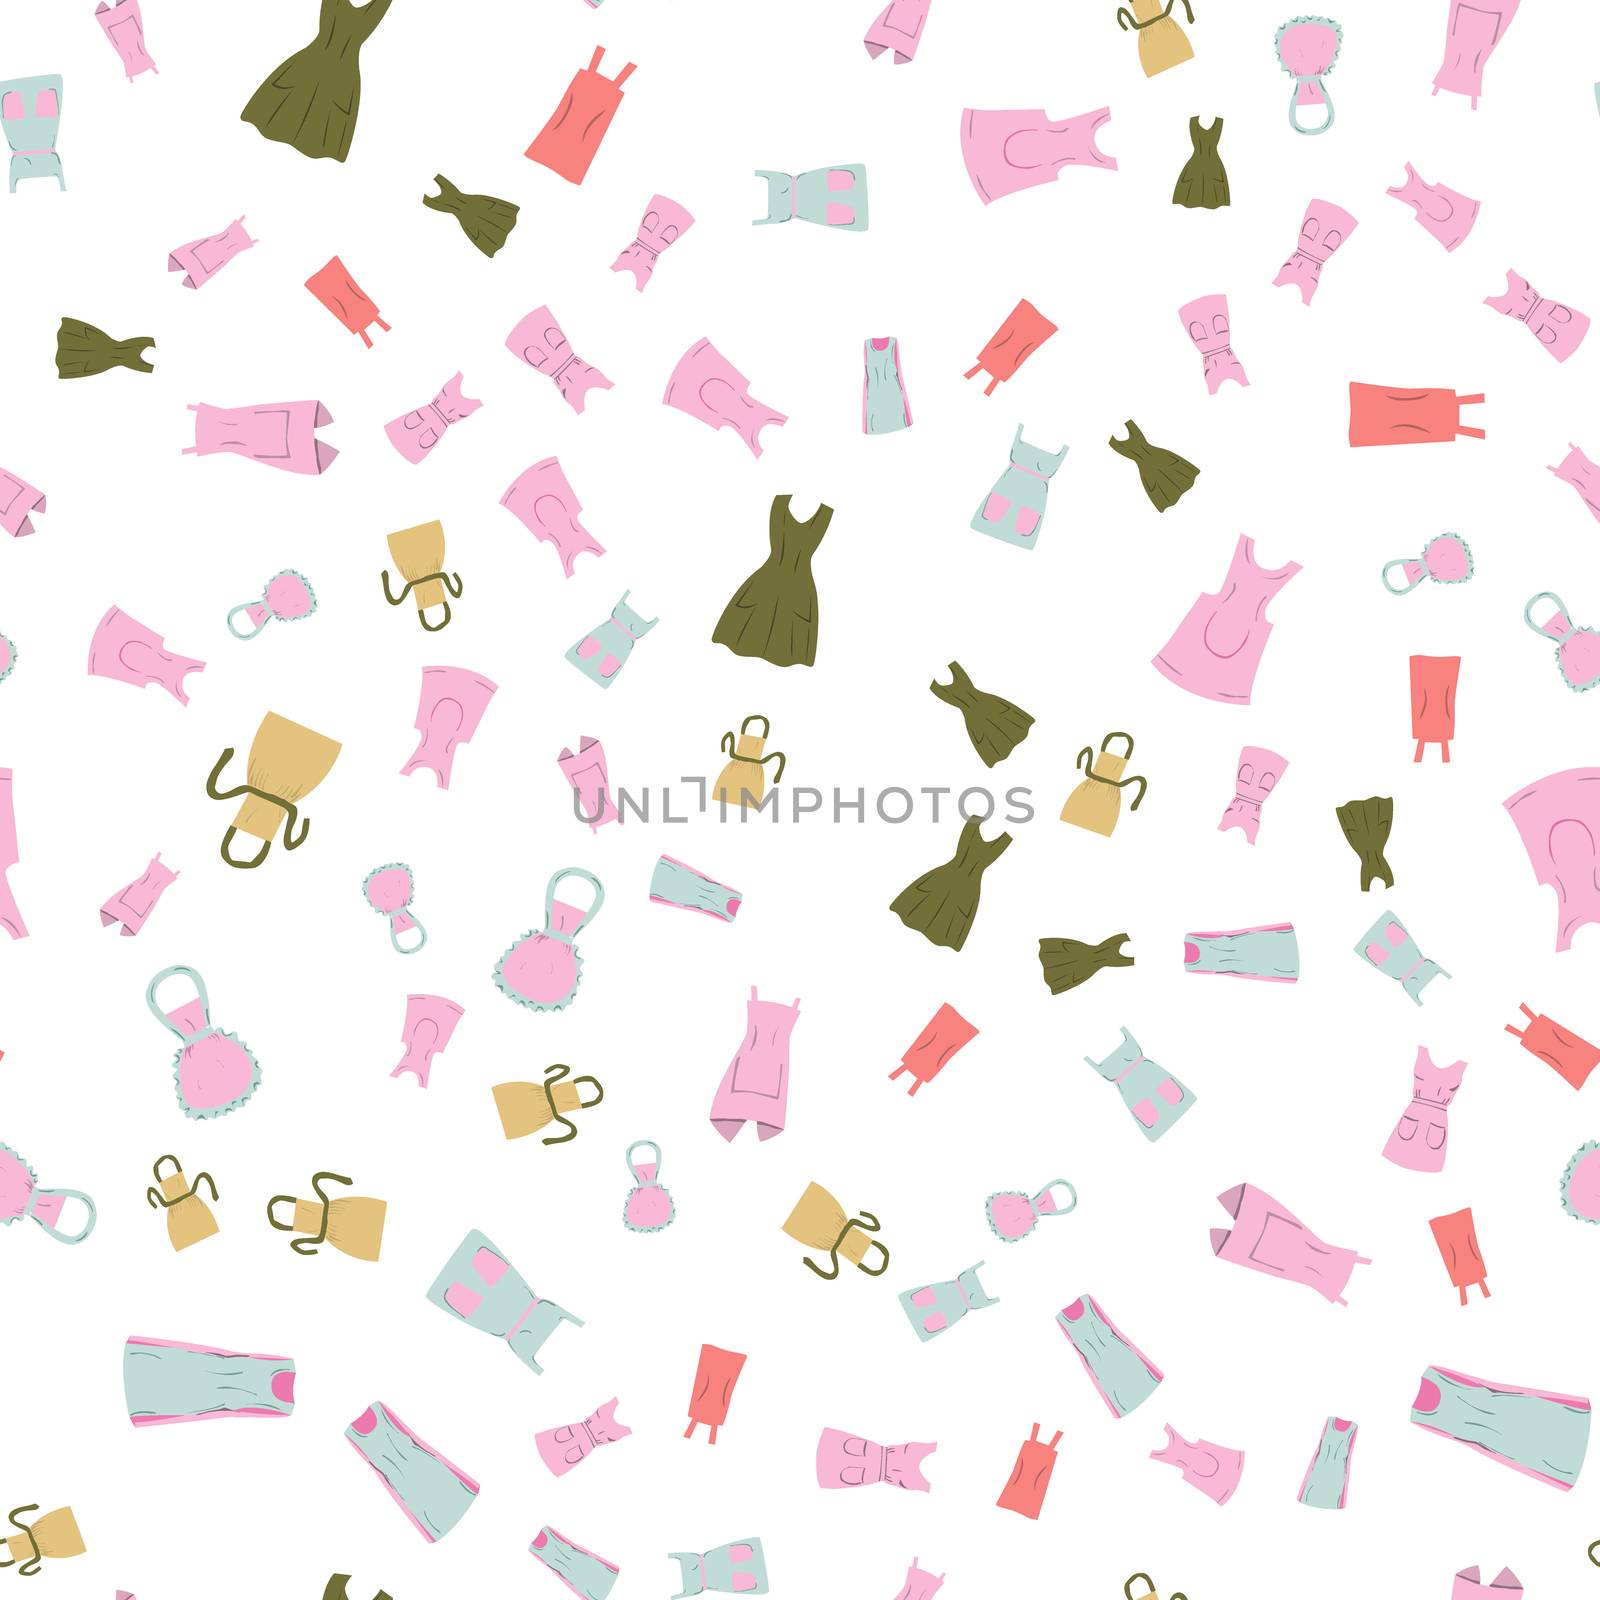 Vintage aprons seamless pattern on white background. Flat cartoon style Vector illustration.